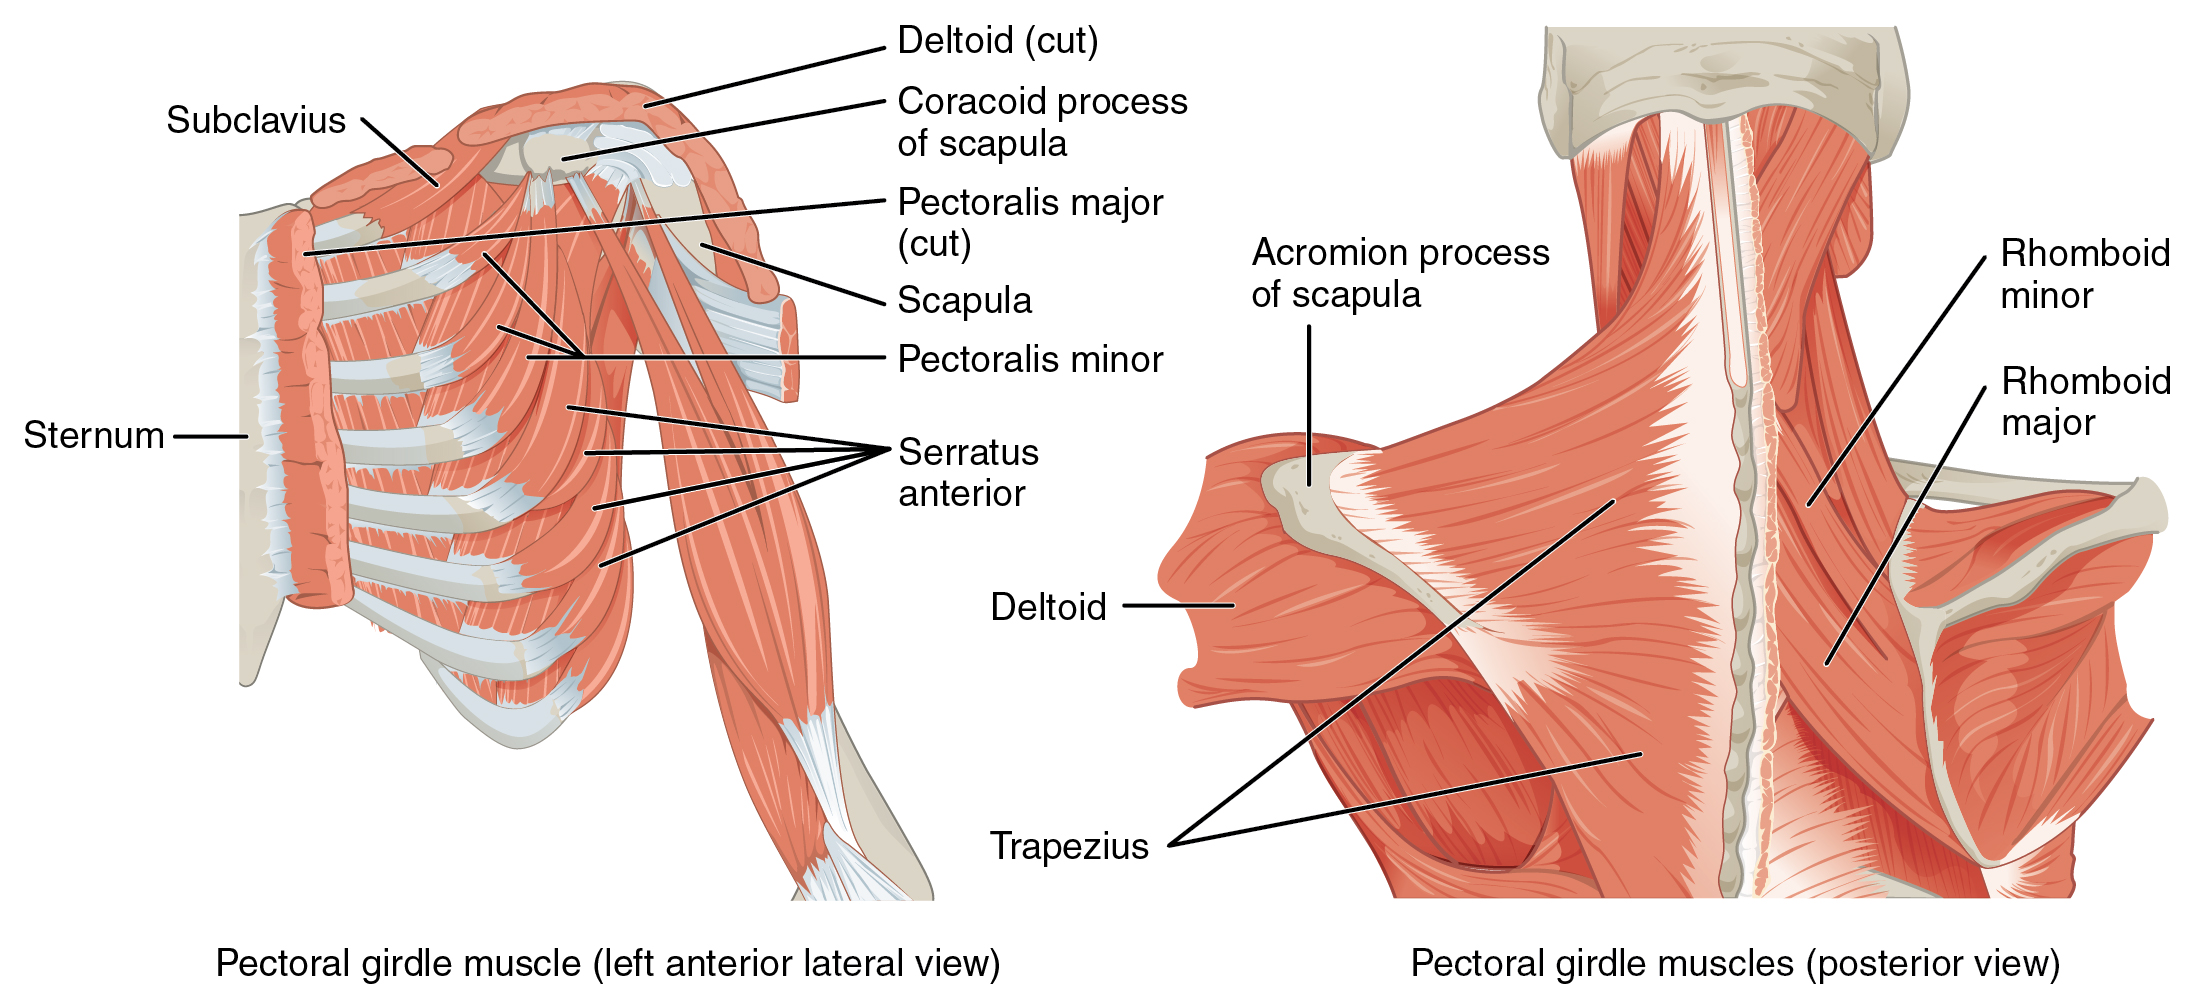 1118 Muscles that Position the Pectoral Girdle